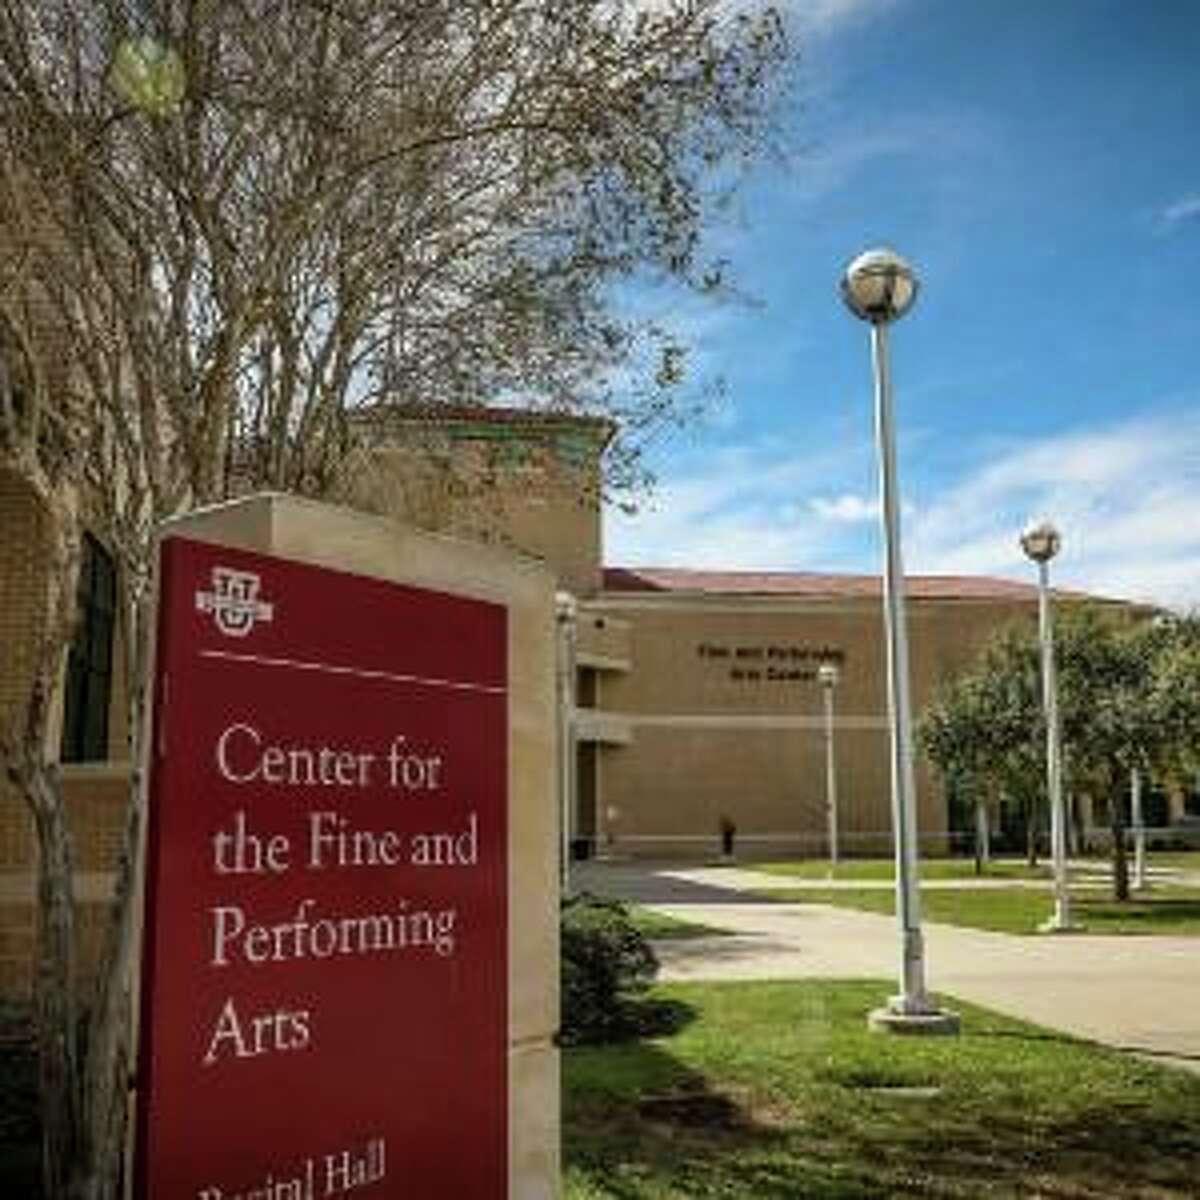 A full list of events, including student recitals, can be accessed at go.tamiu.edu/fpaevents.